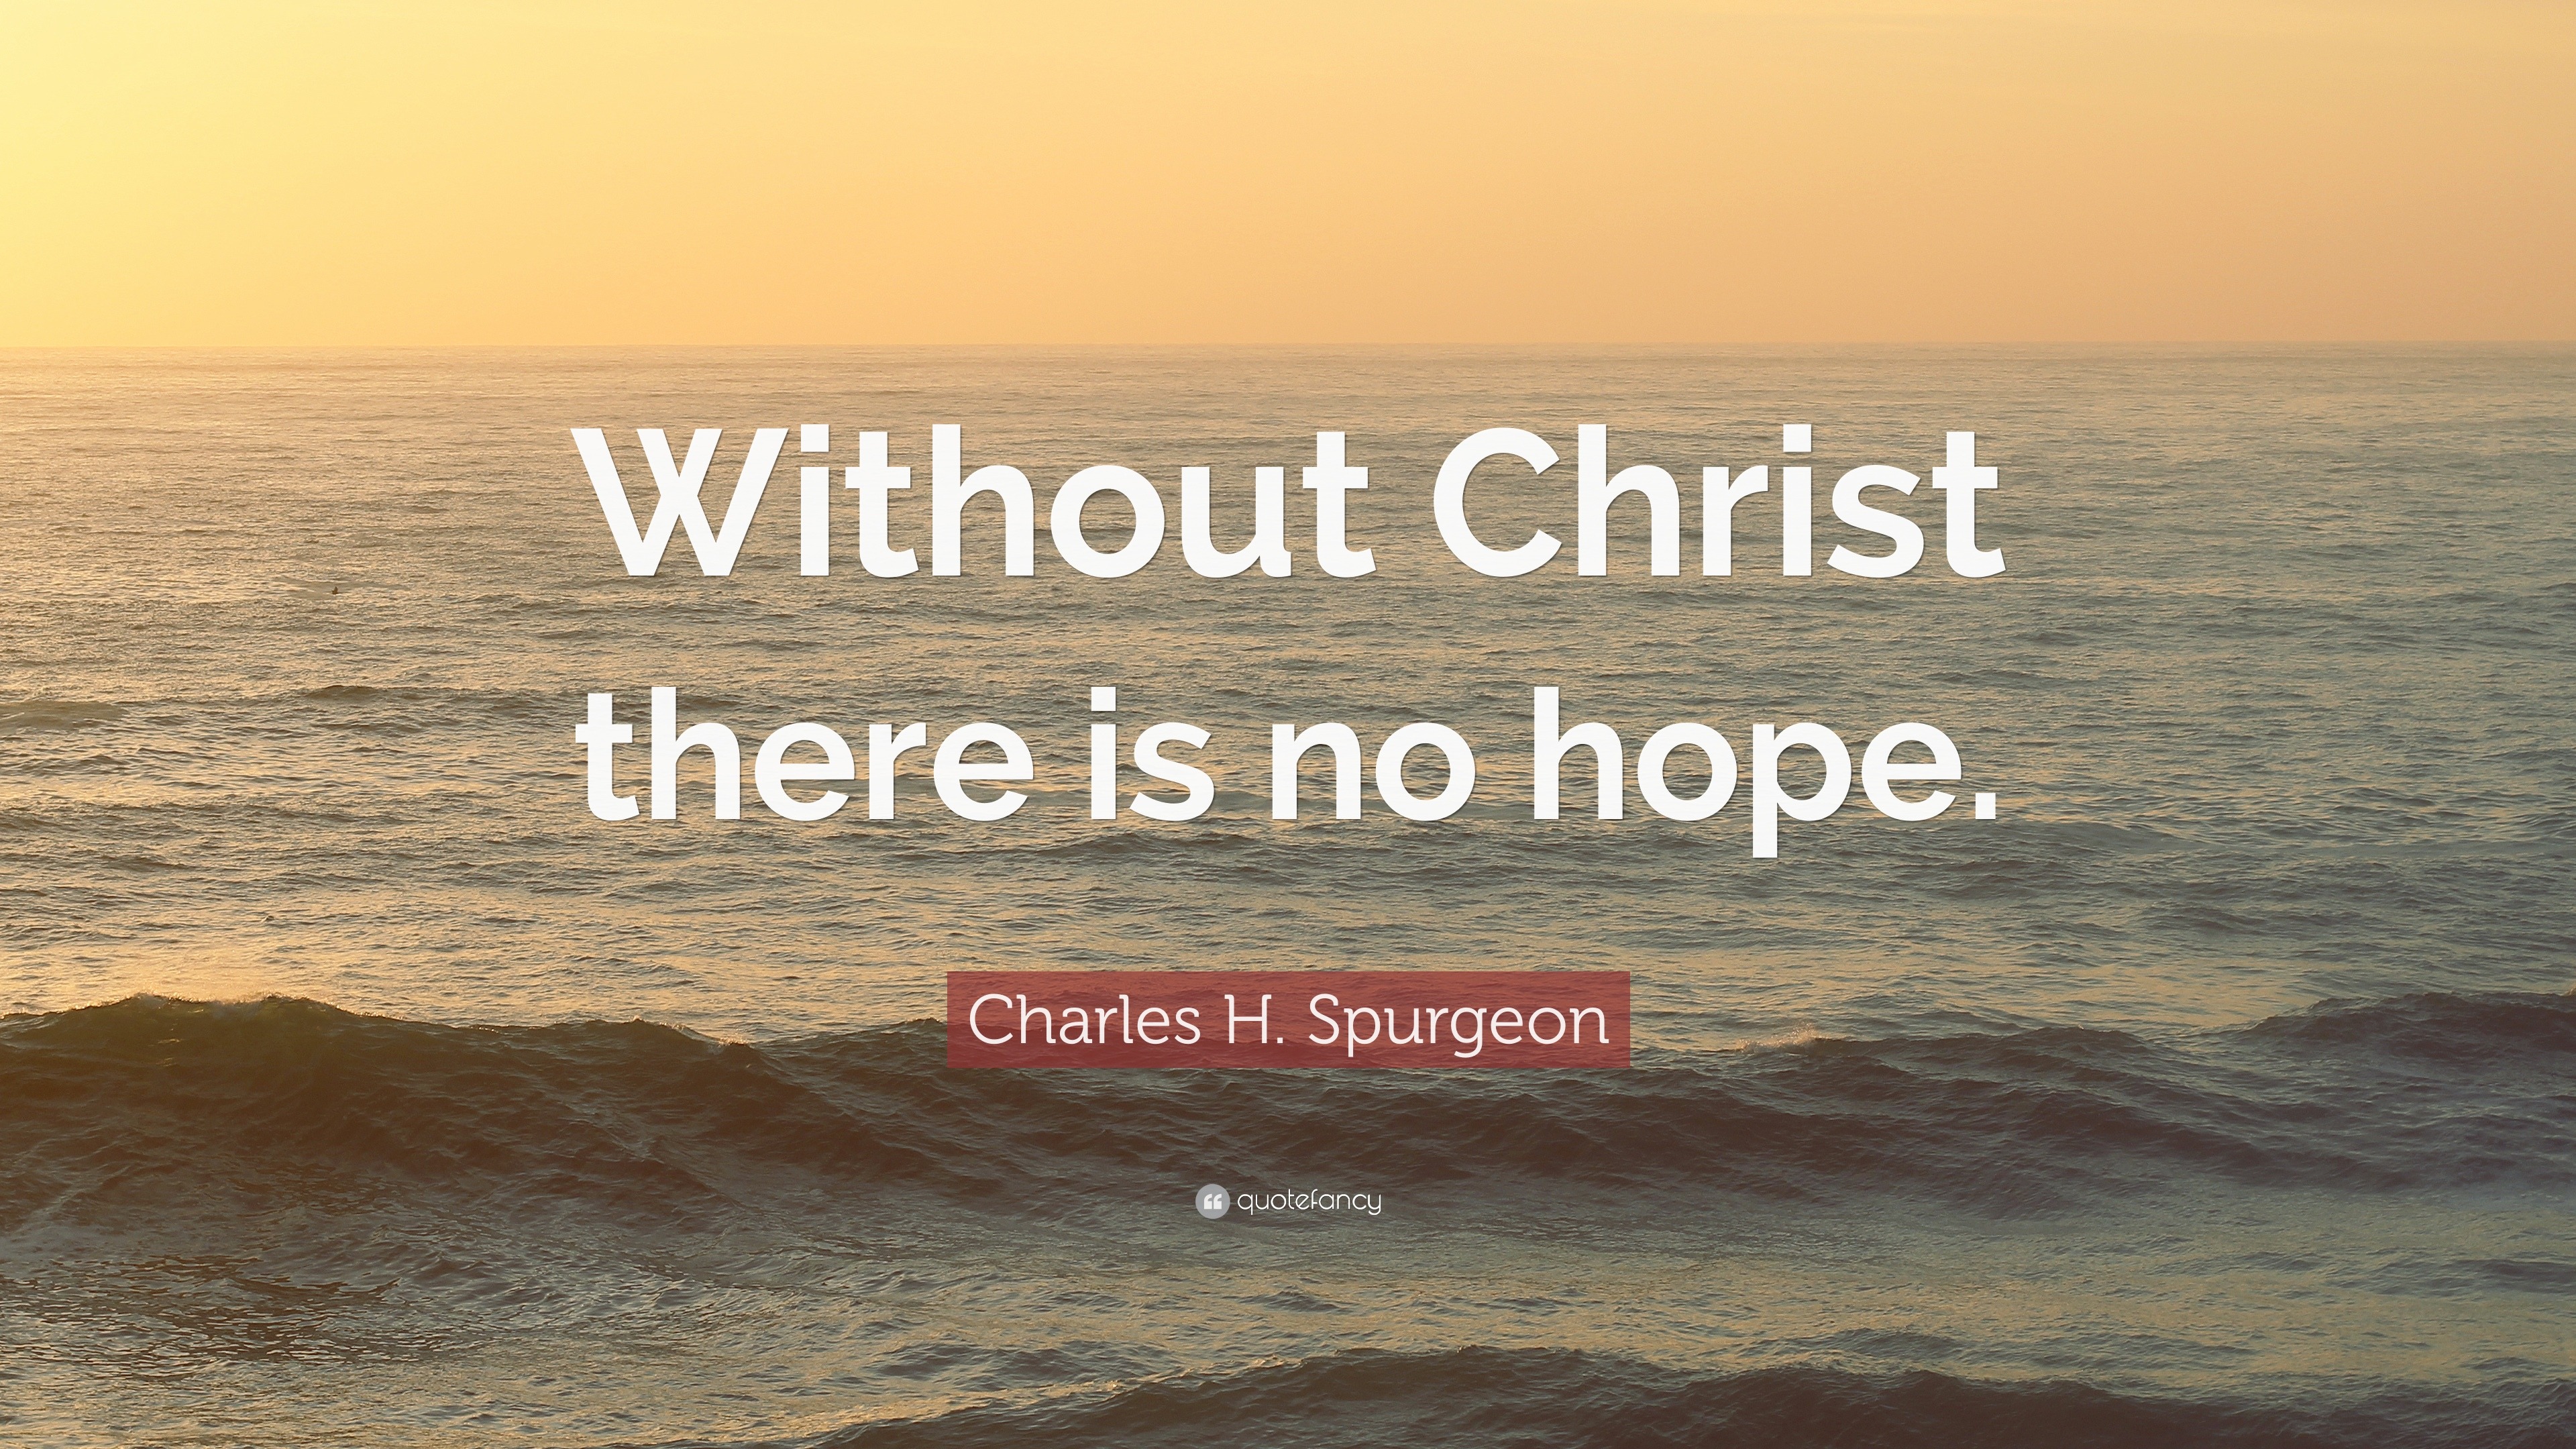 Charles H Spurgeon Quote   Without  Christ there is no 